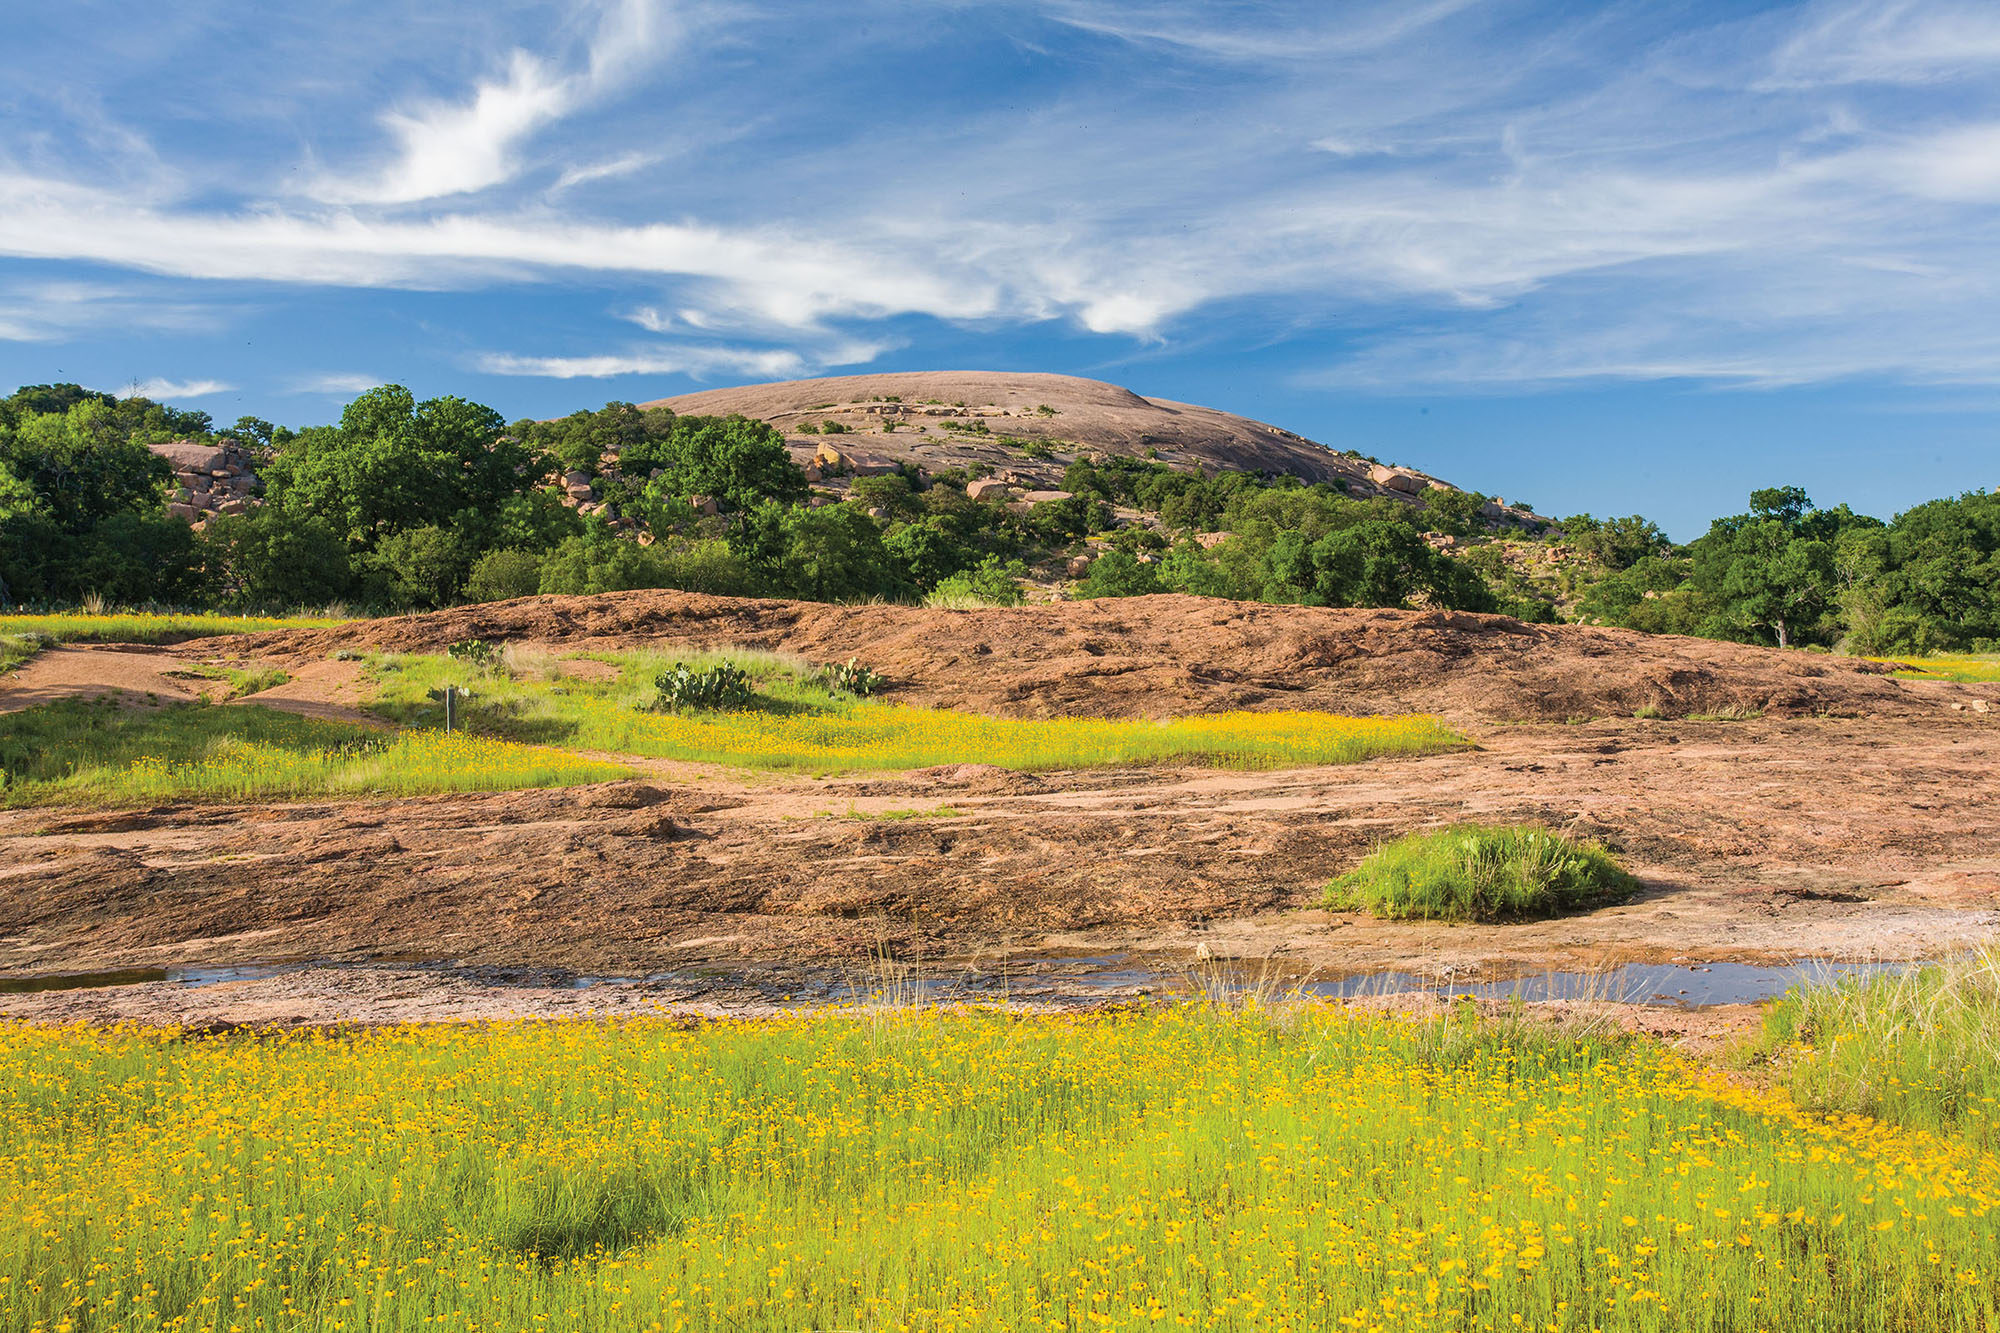 Green grass and flowers in front of the red rock facade of Enchanted Rock